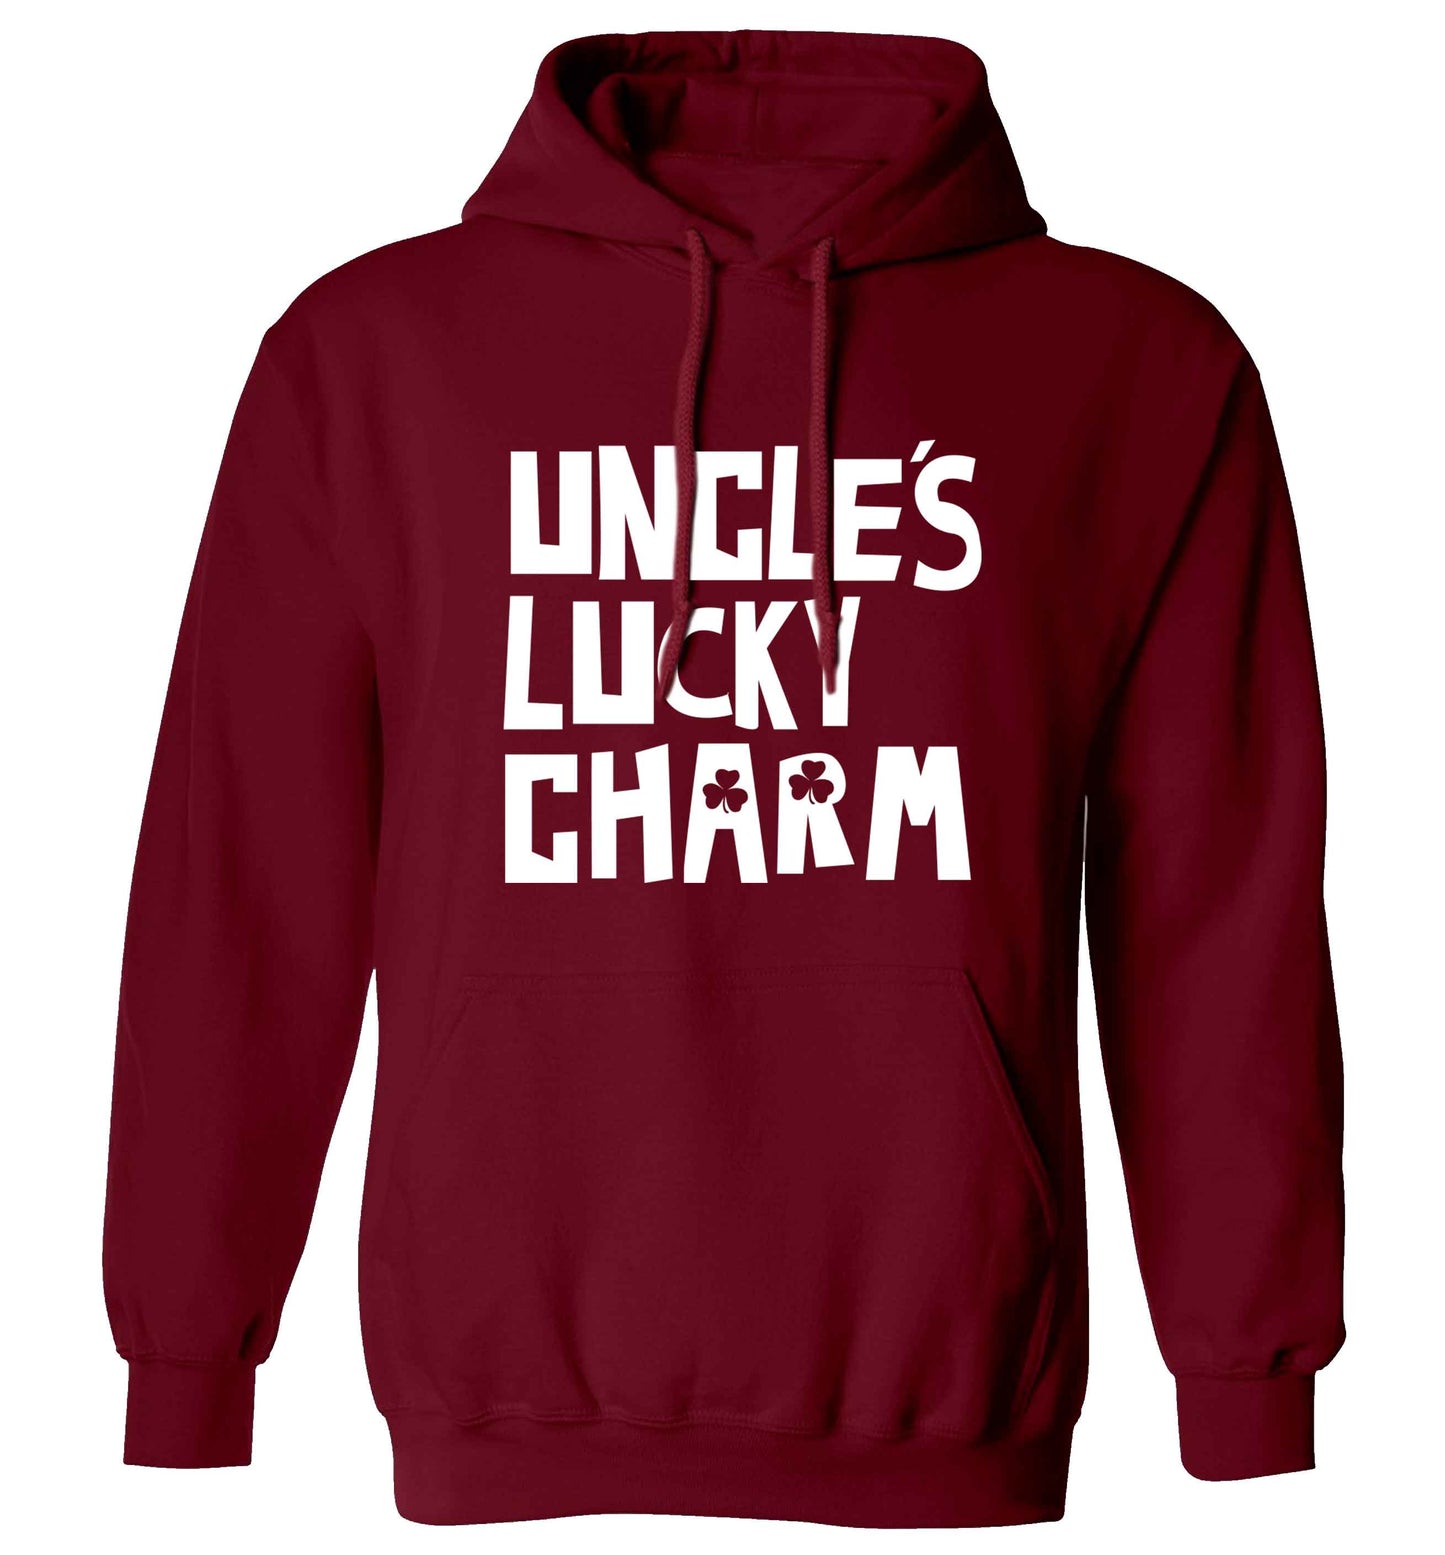 Uncles lucky charm adults unisex maroon hoodie 2XL